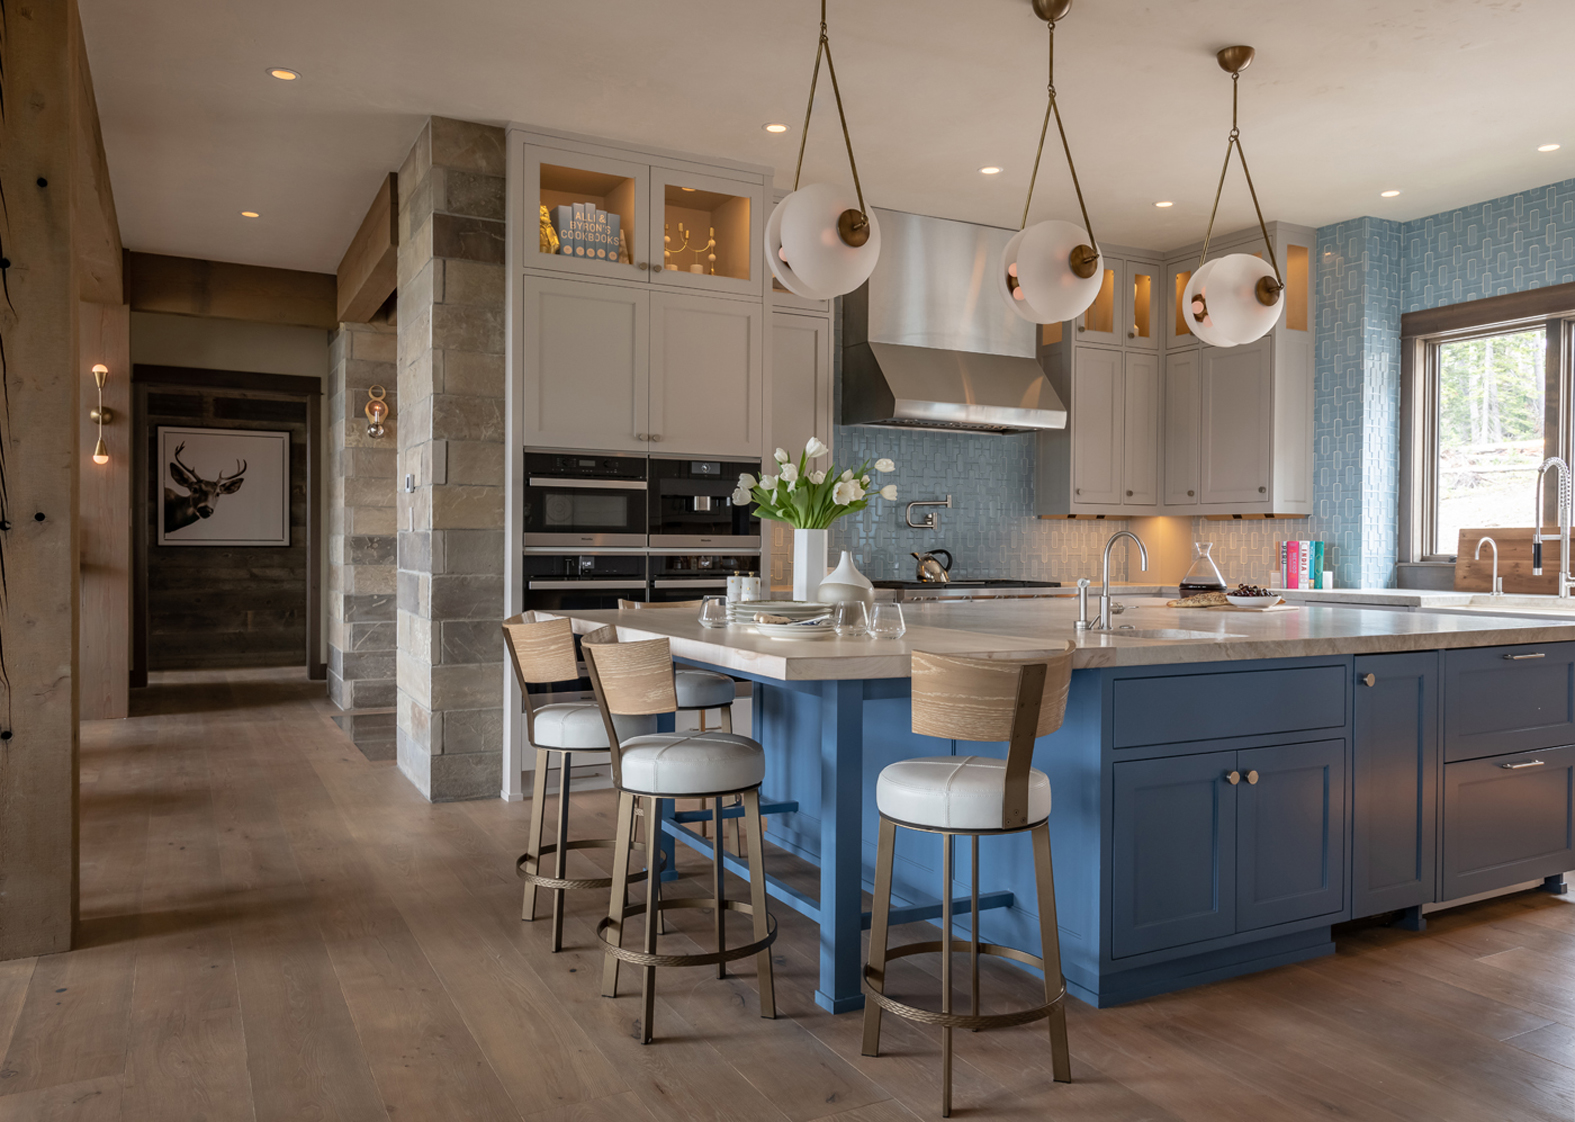 This “Blue Bird Powder Day” Montana home by Envi Interior Design incorporates bold color from local skies and regional materials presented in a sophisticated alpine style (PC: Audrey Hall).